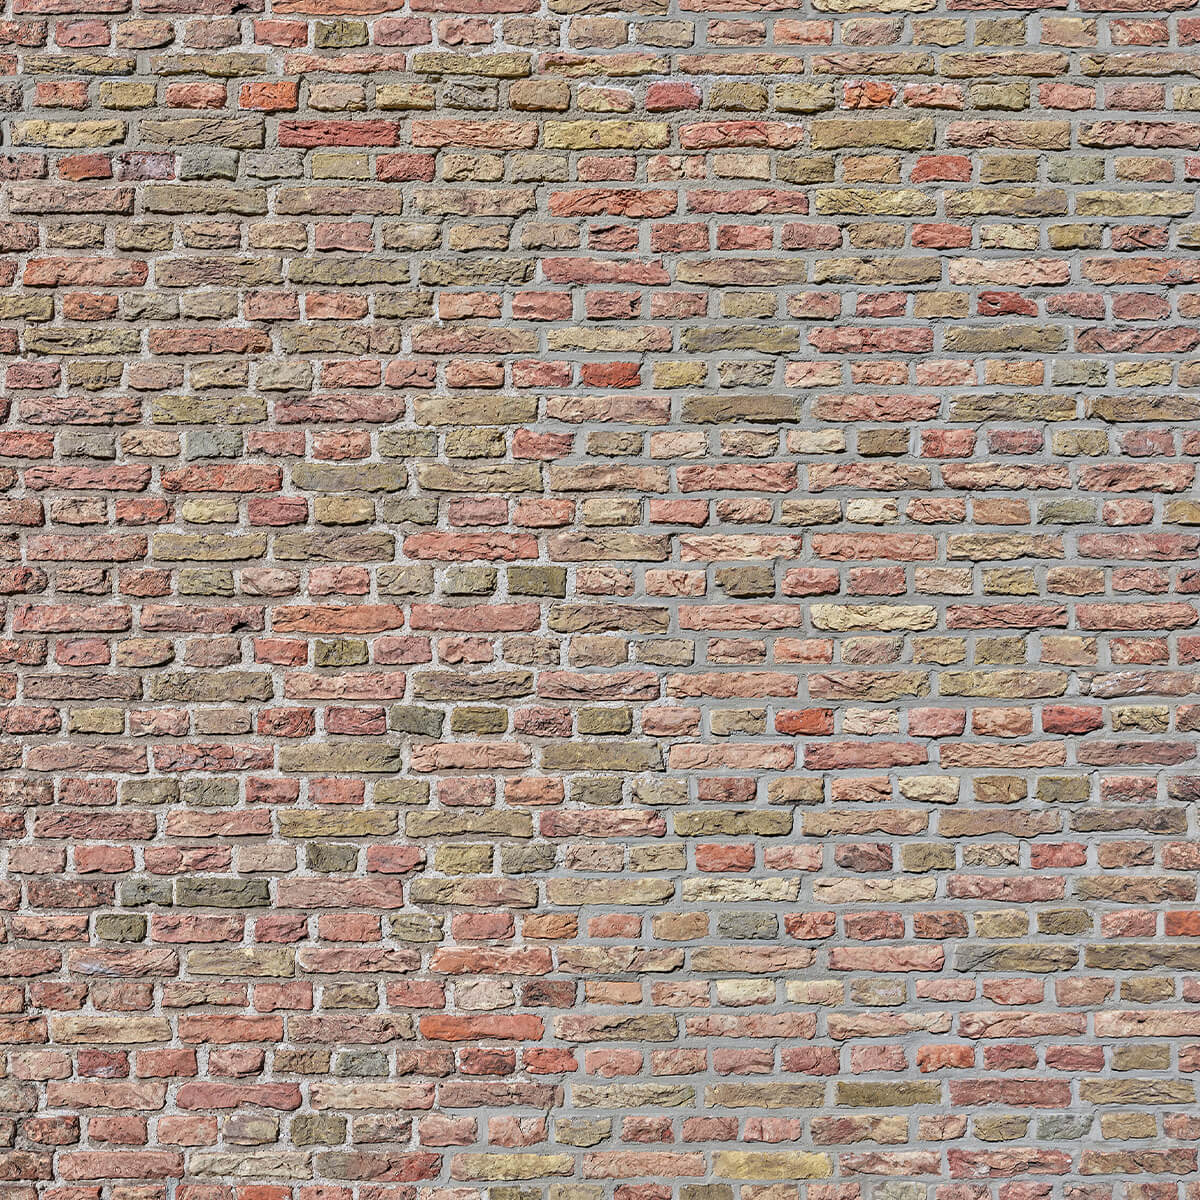 Brick wall with restored joints